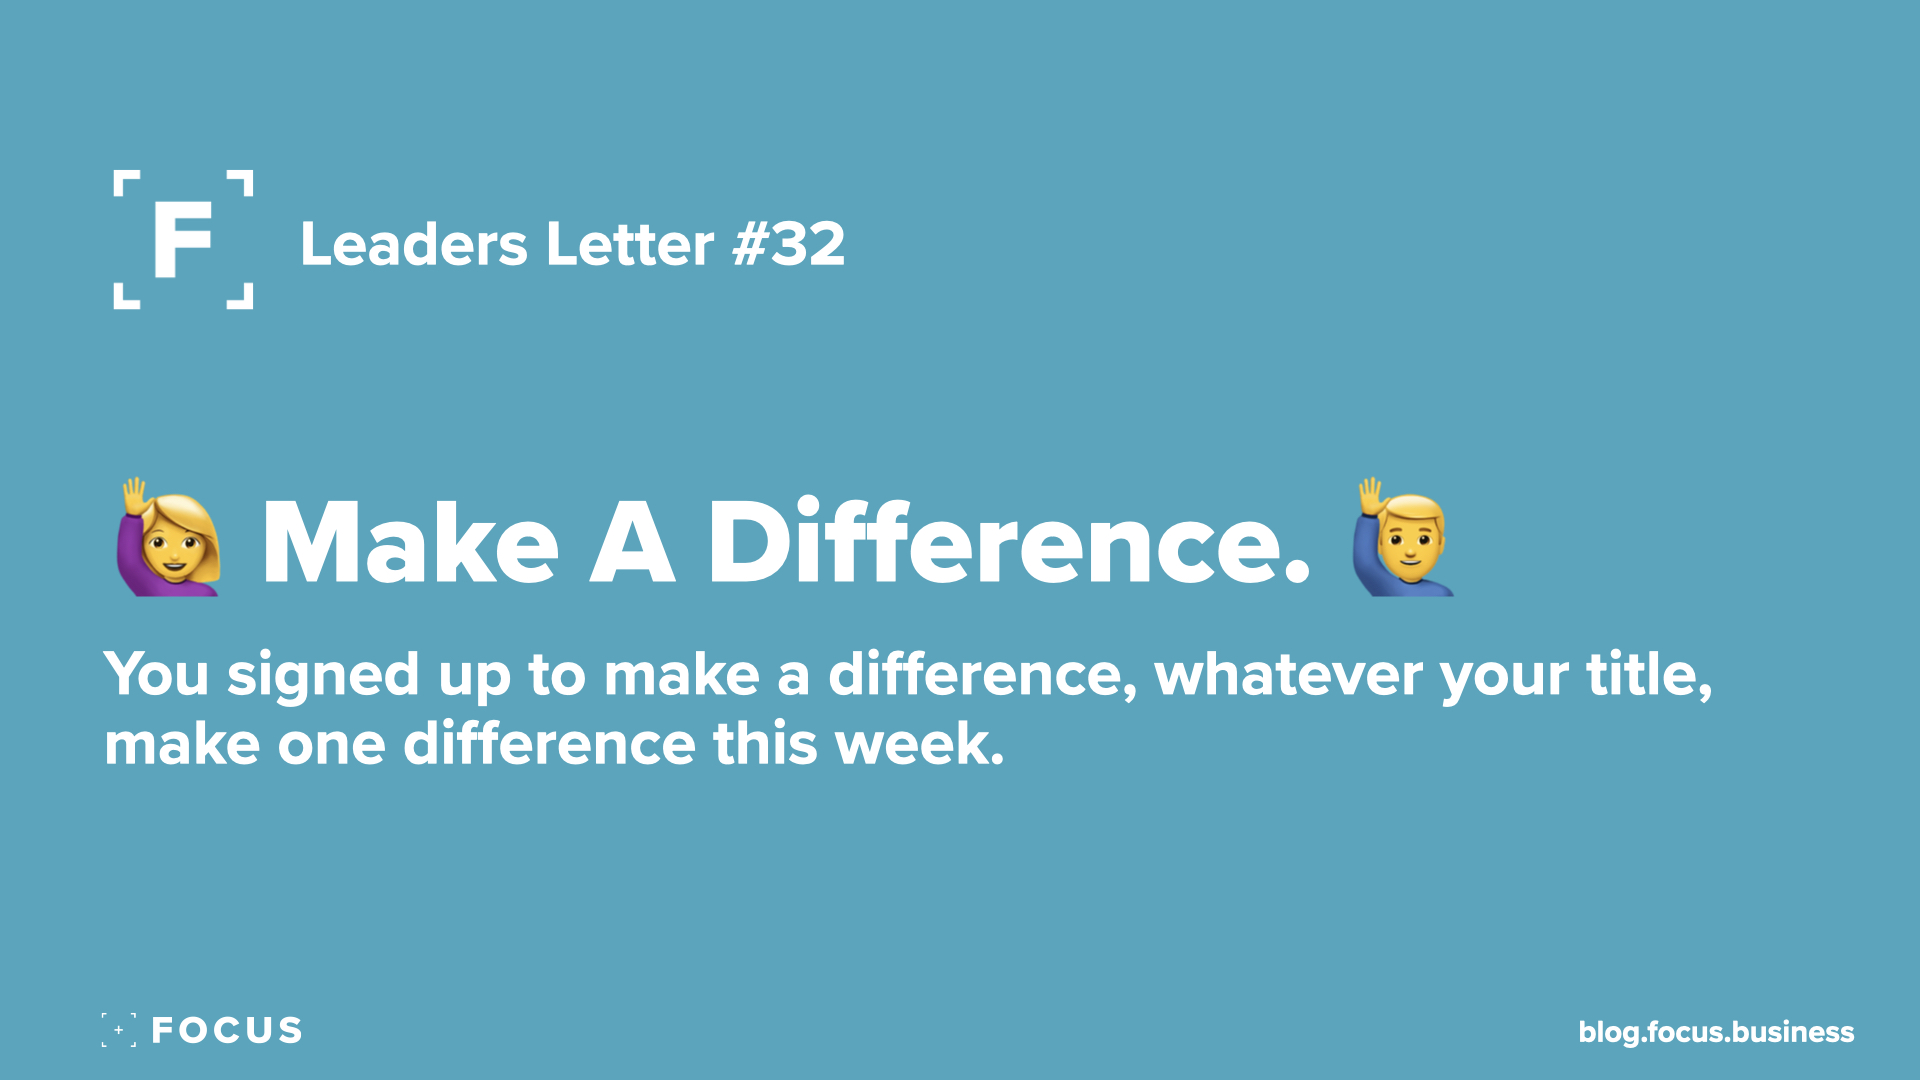 Make a difference - leaders letter 32